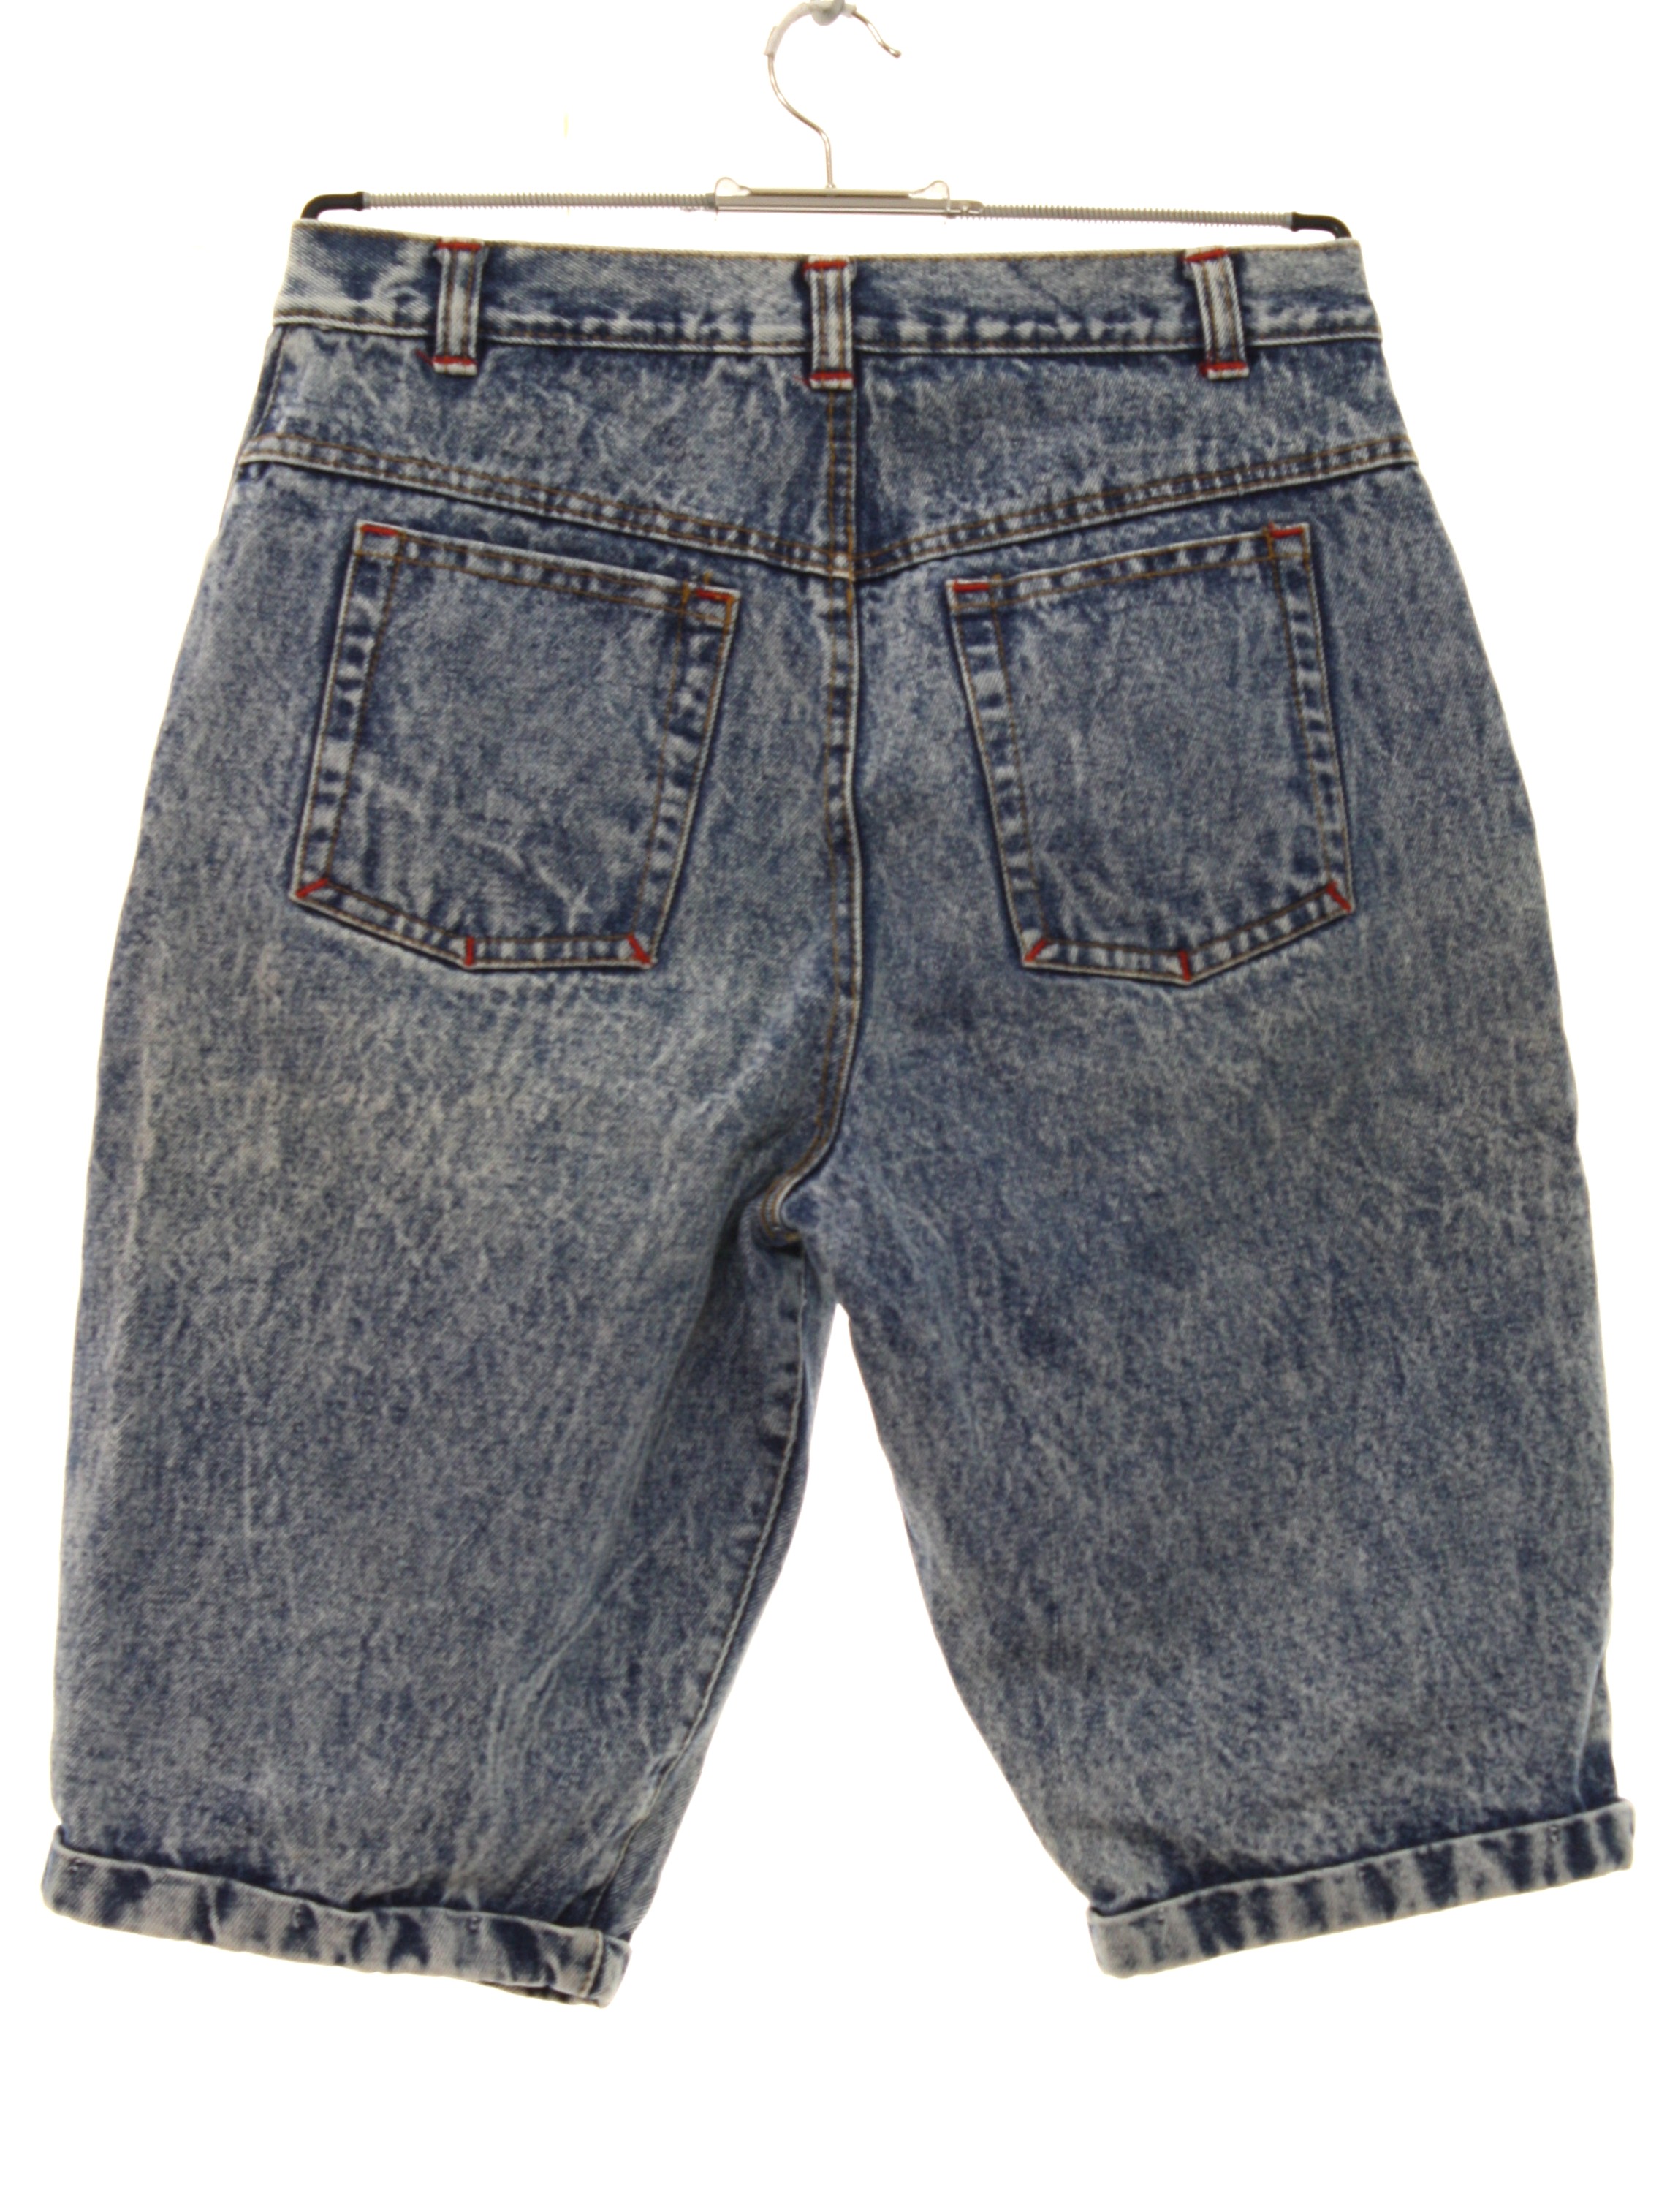 1980's Retro Shorts: 80s -No Label- Womens stone washed blue cotton ...